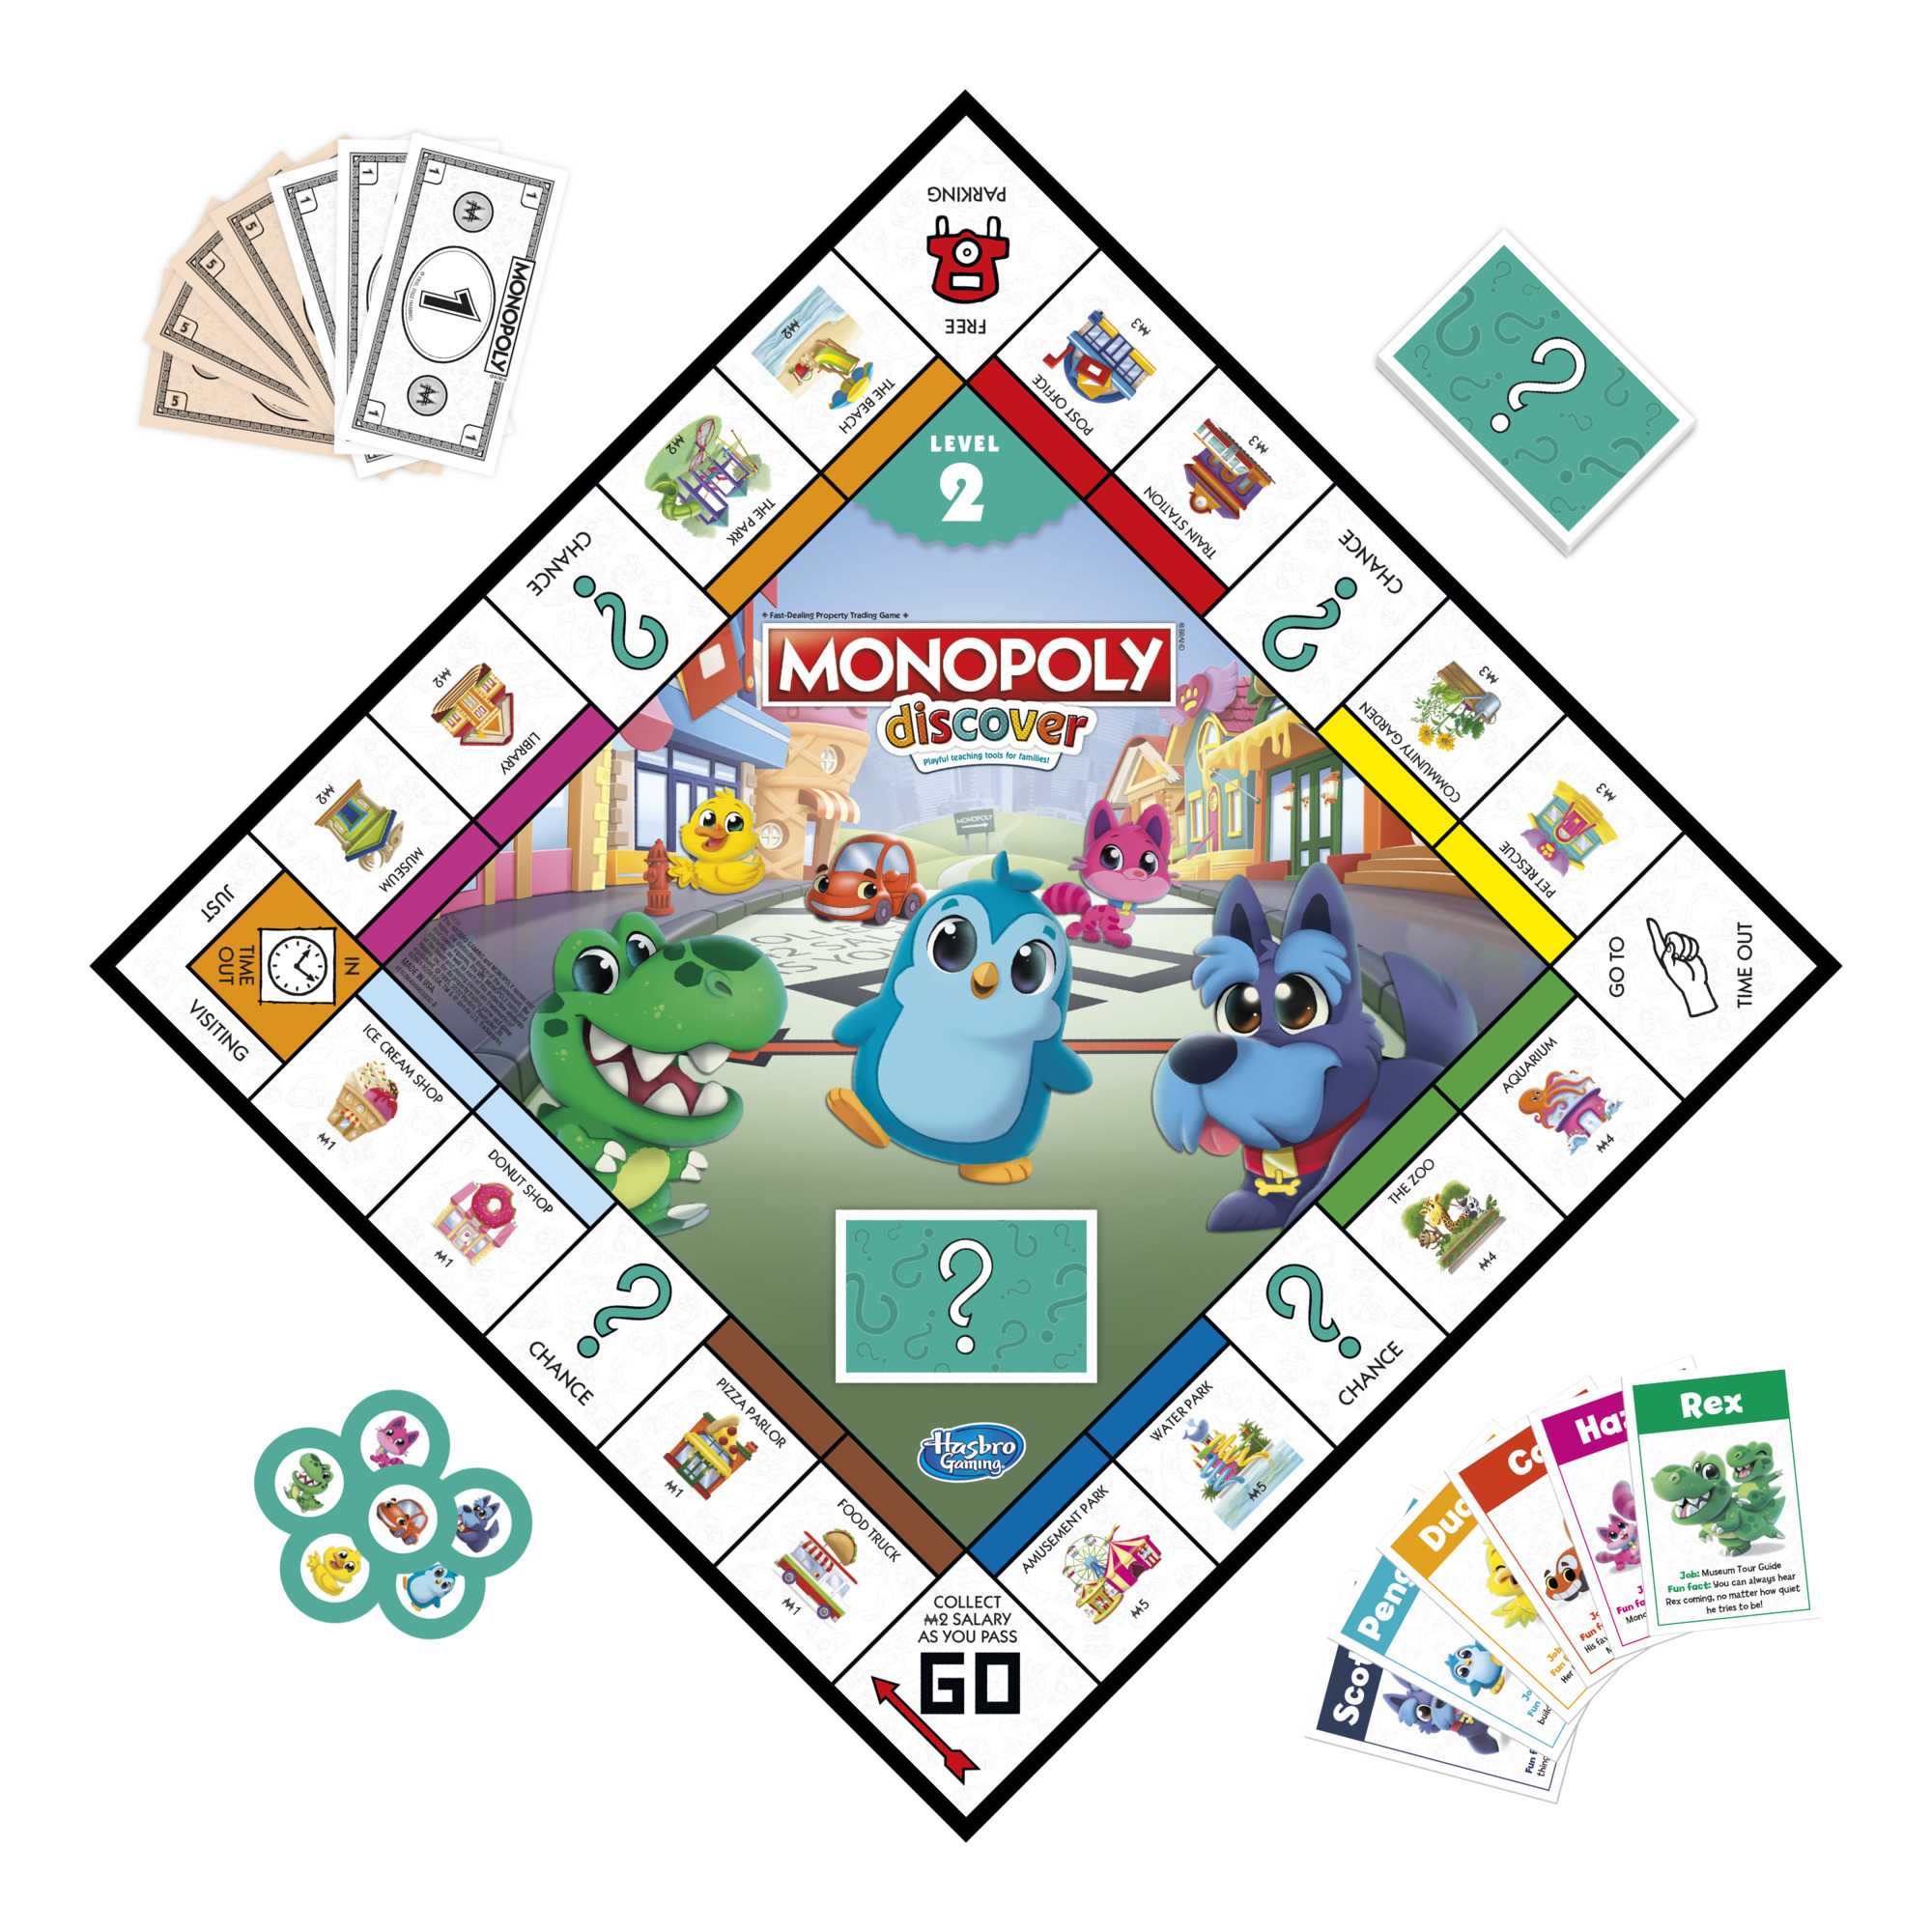 MONOPOLY DISCOVER F4436 - N51022